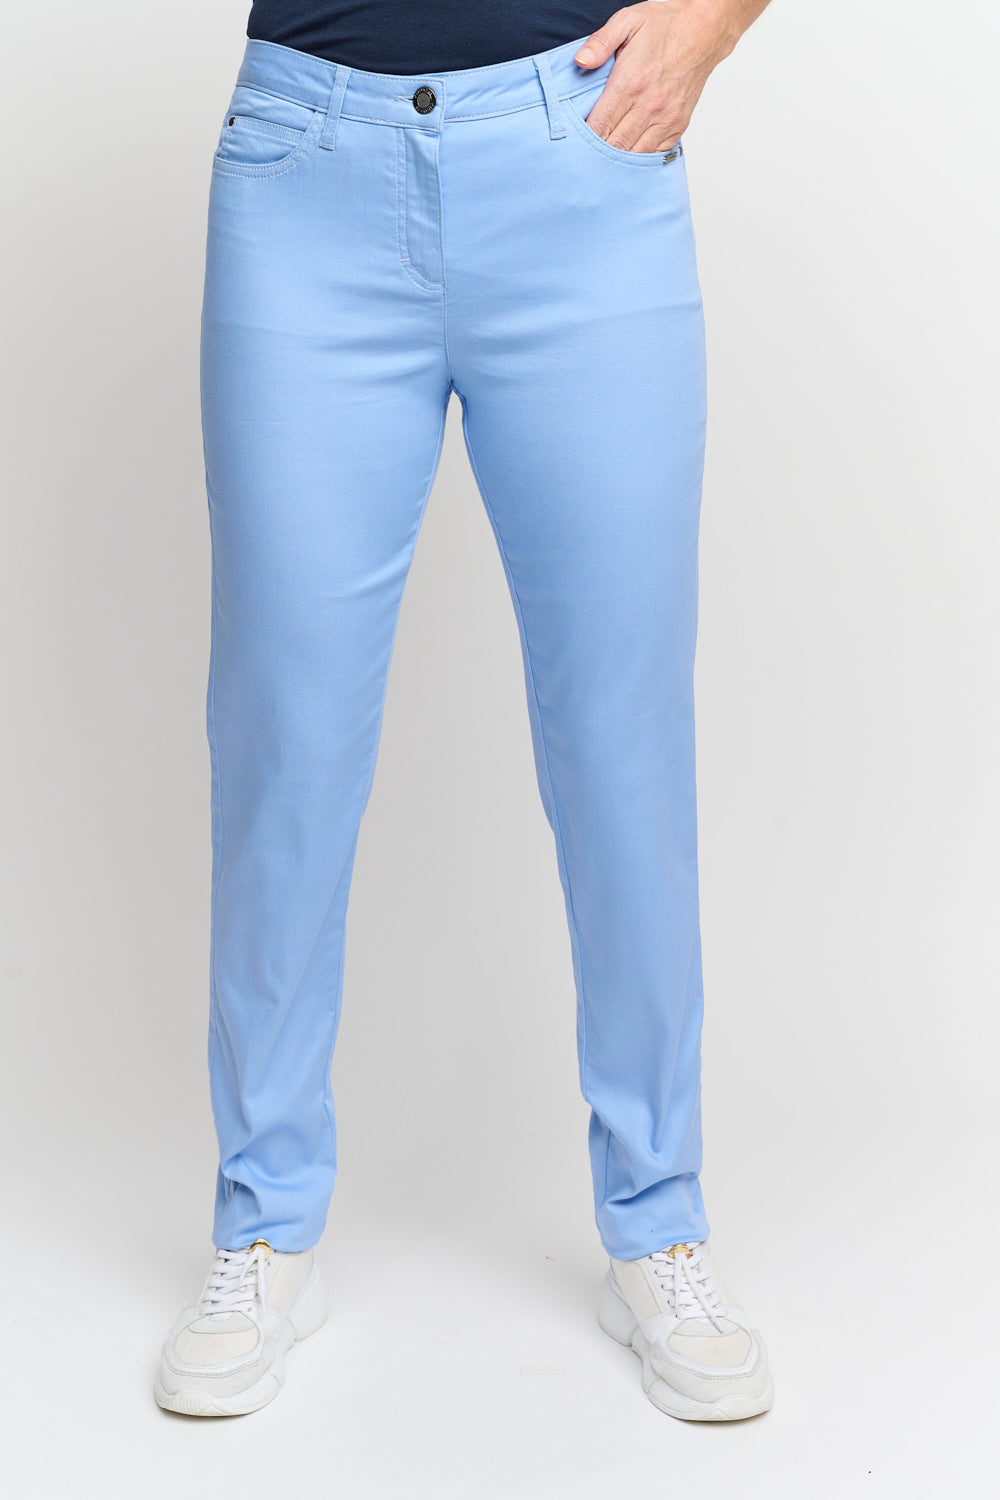 Jeans Superstretch Madelaine - Serenity Blue